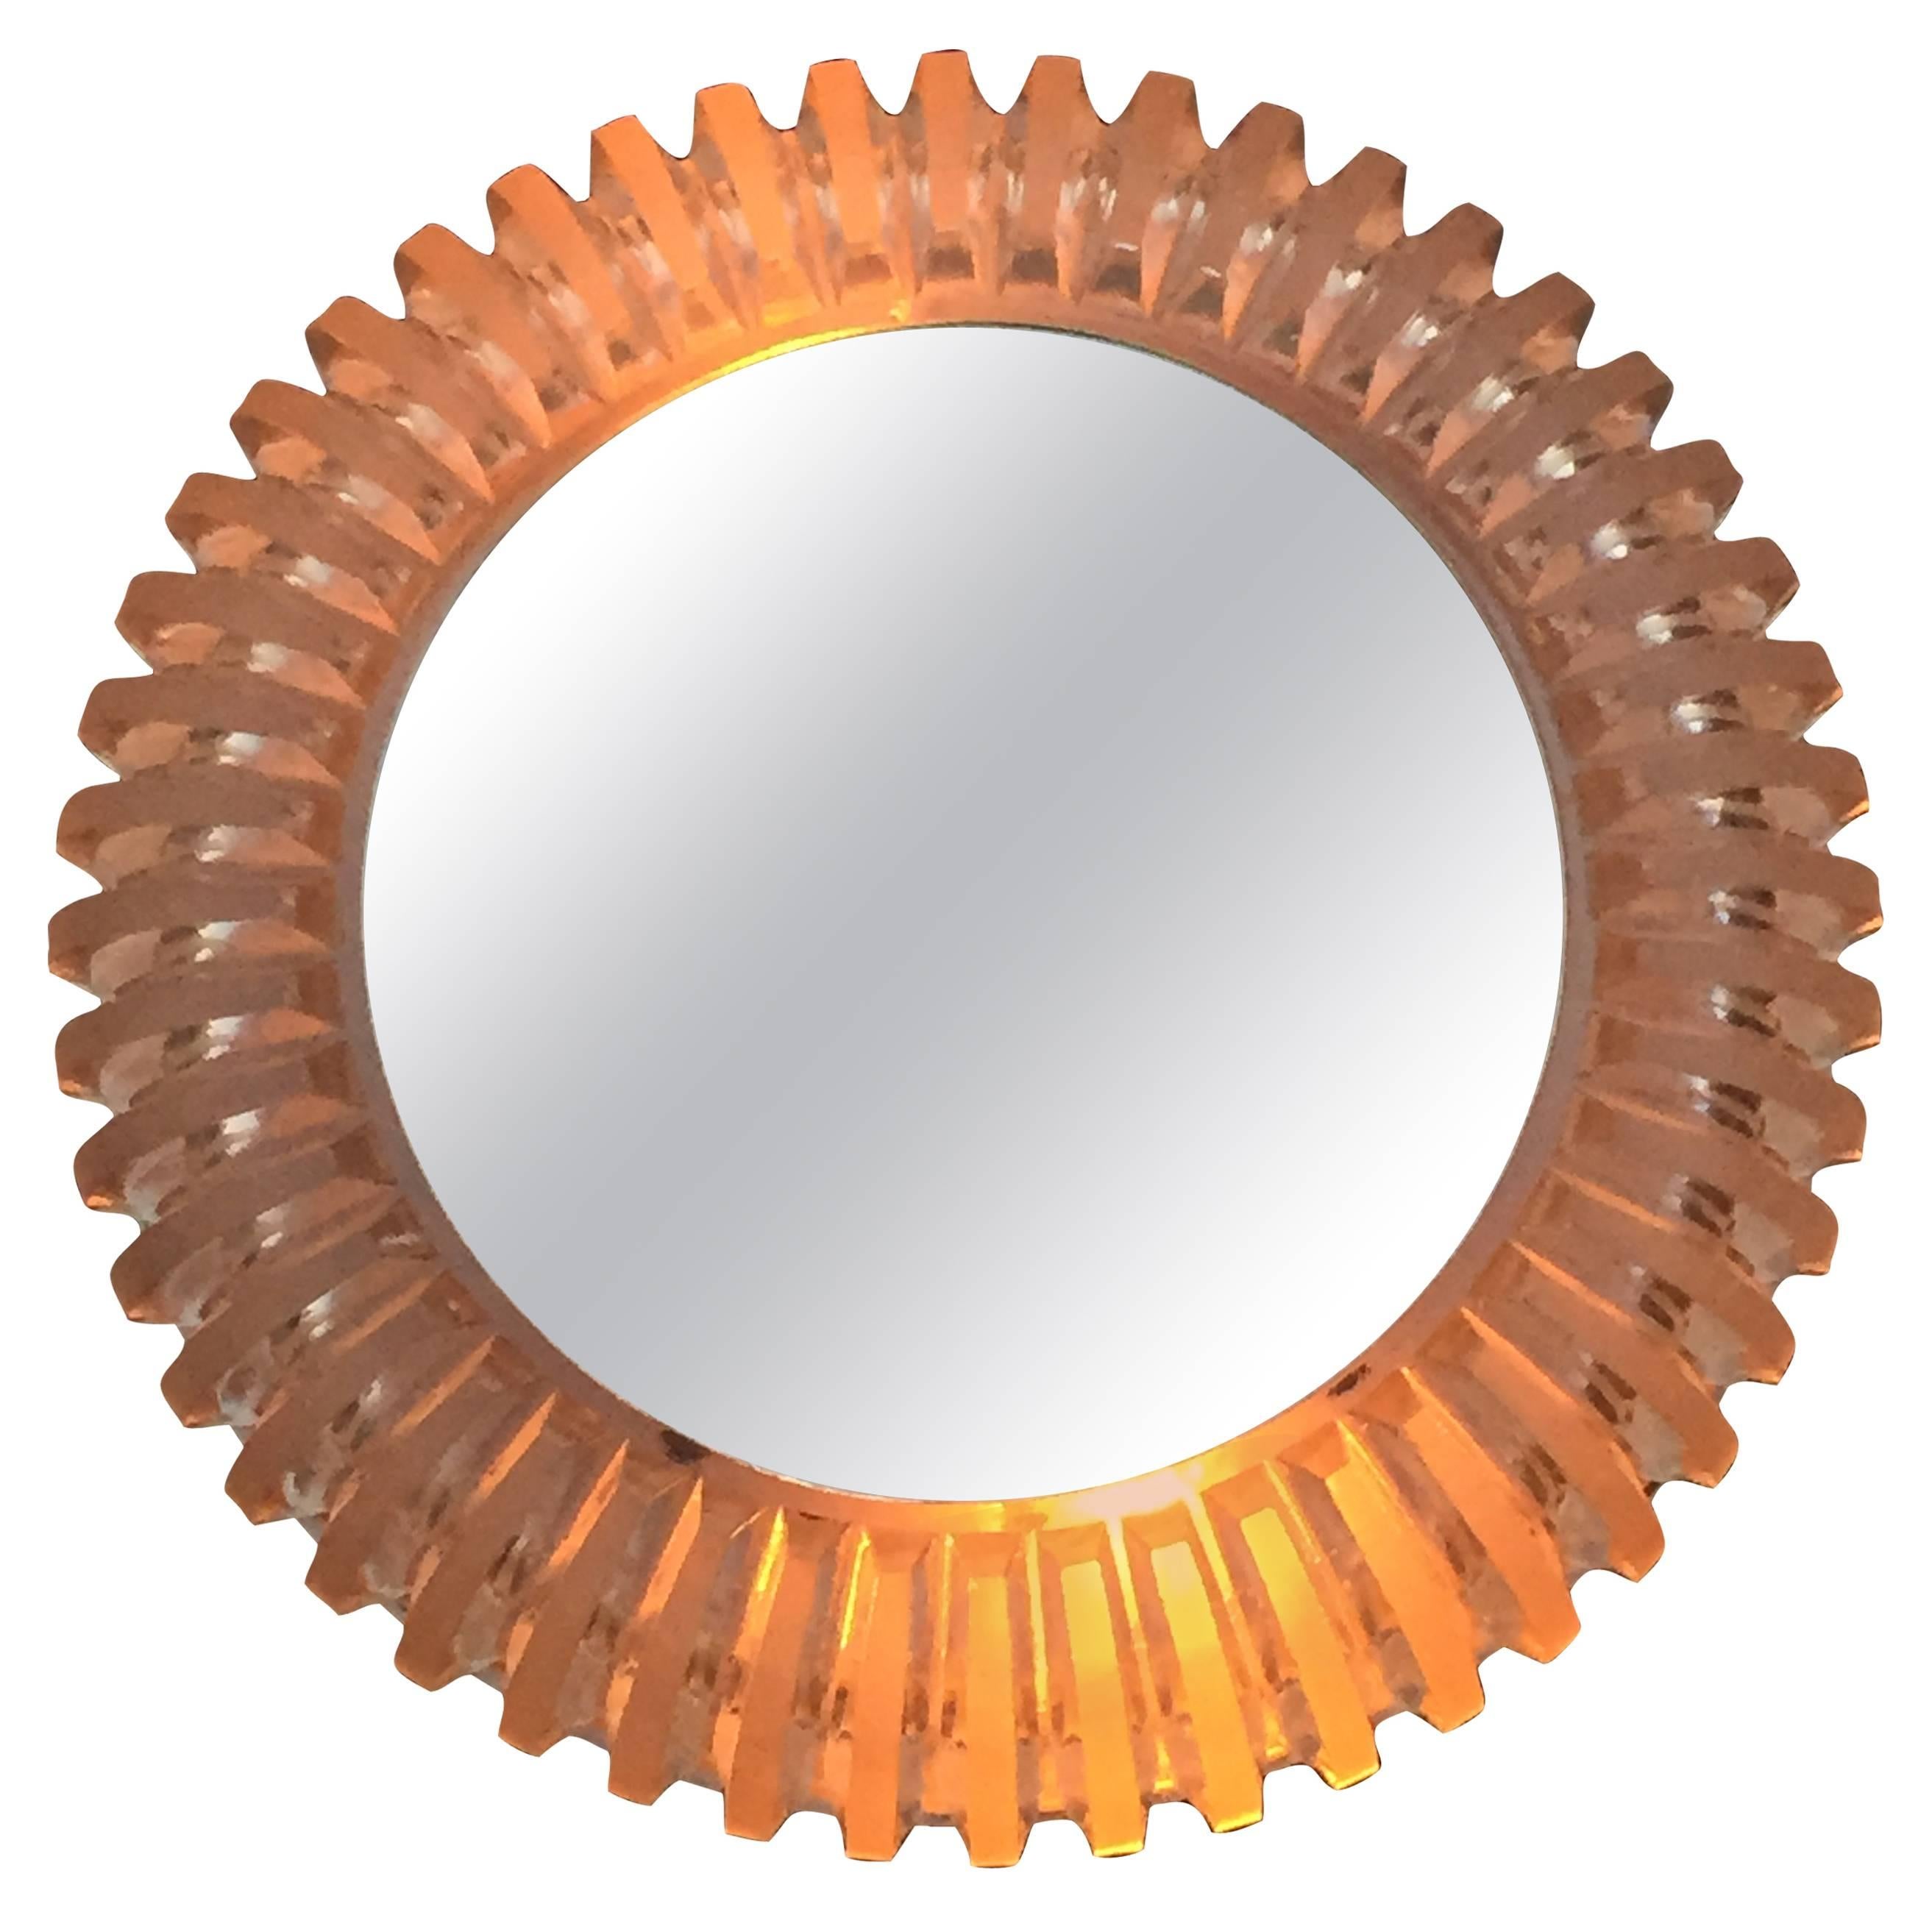 Petite Illuminated Mirror with Frosted Glass Attributed to Hillebrand